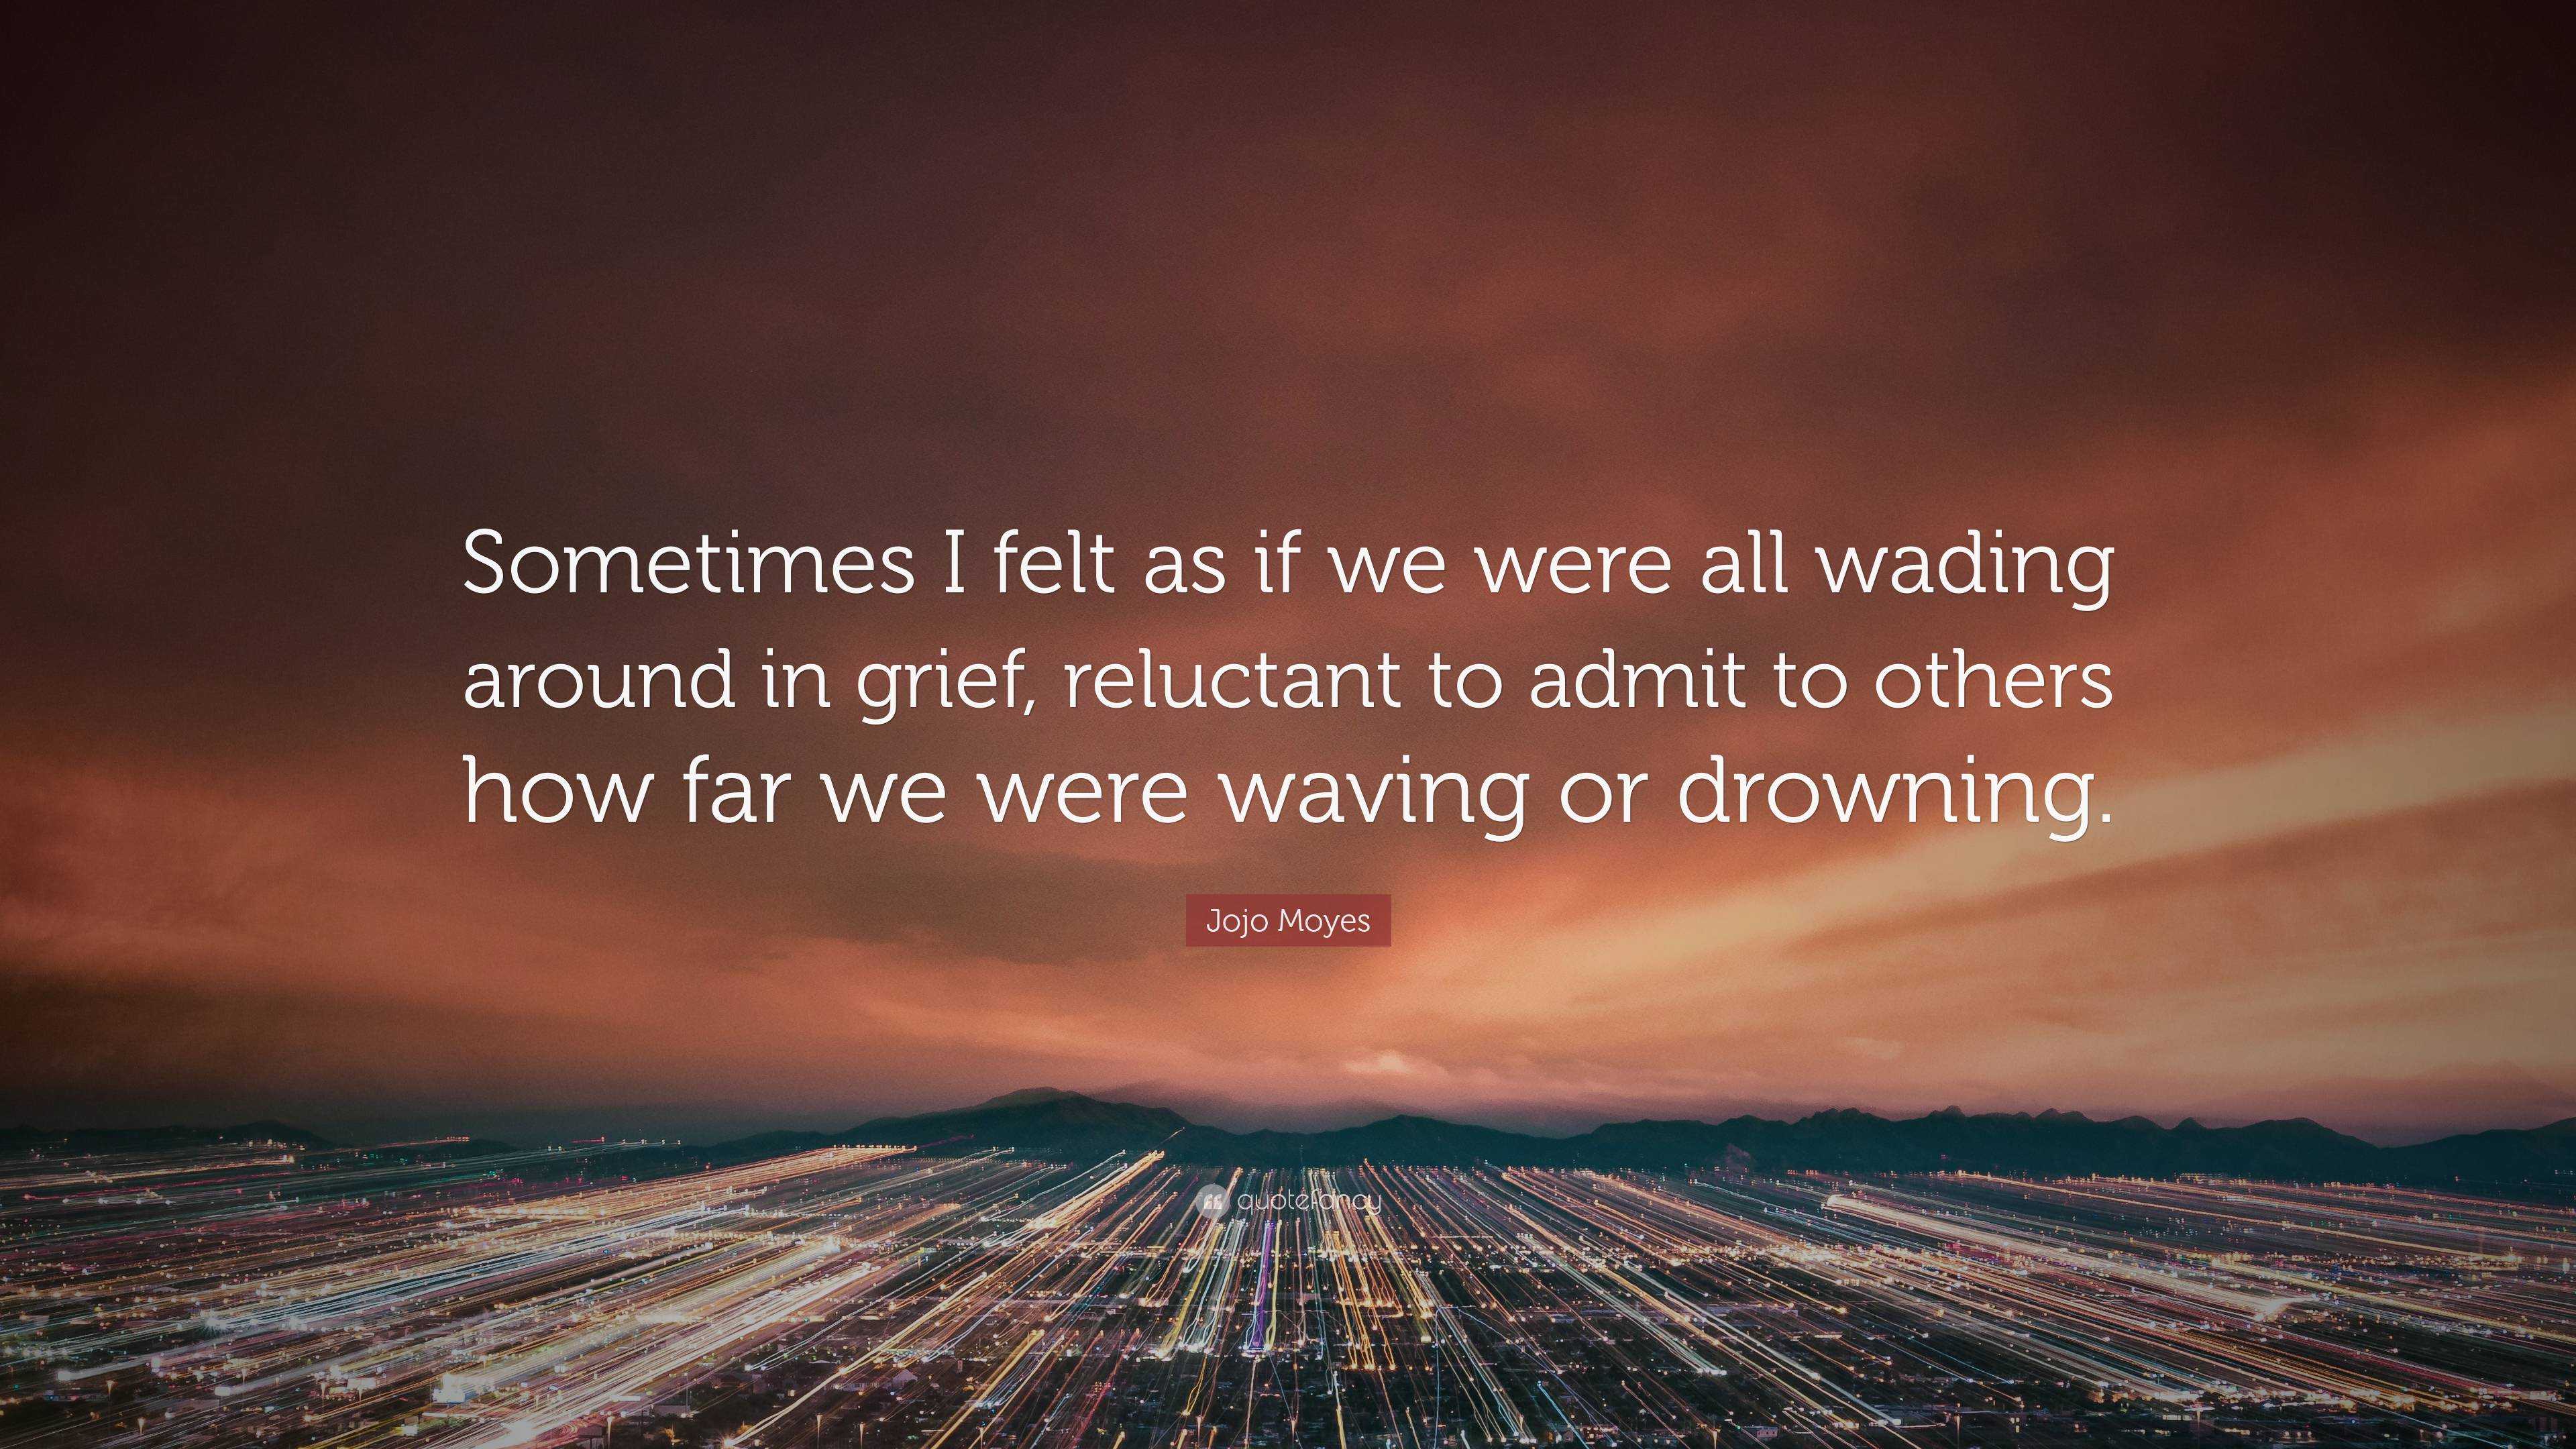 Jojo Moyes Quote: “Sometimes I felt as if we were all wading around in ...